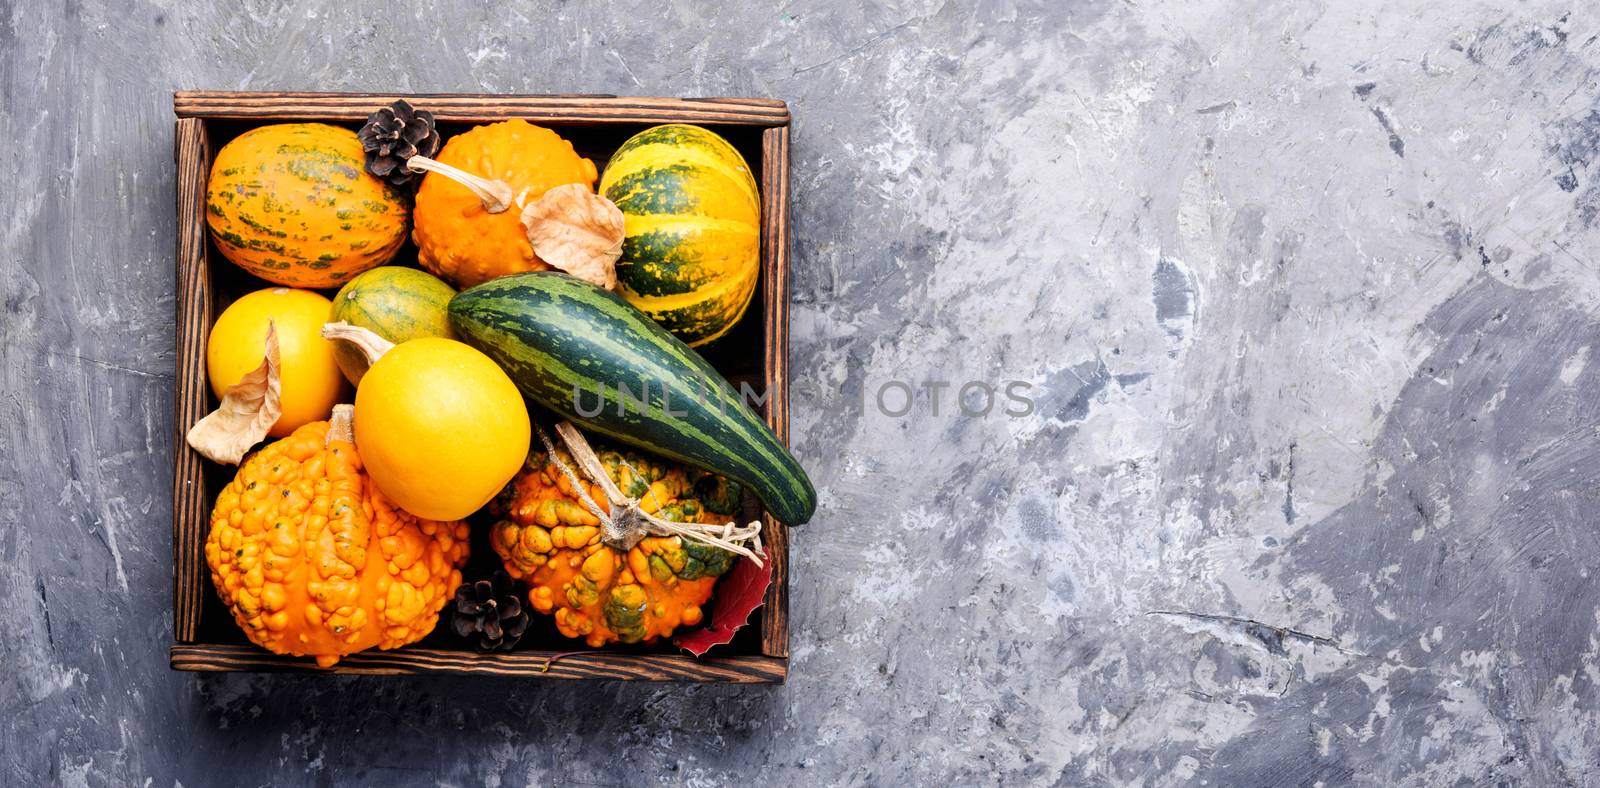 Different varieties of squashes and pumpkins.Autumn harvest